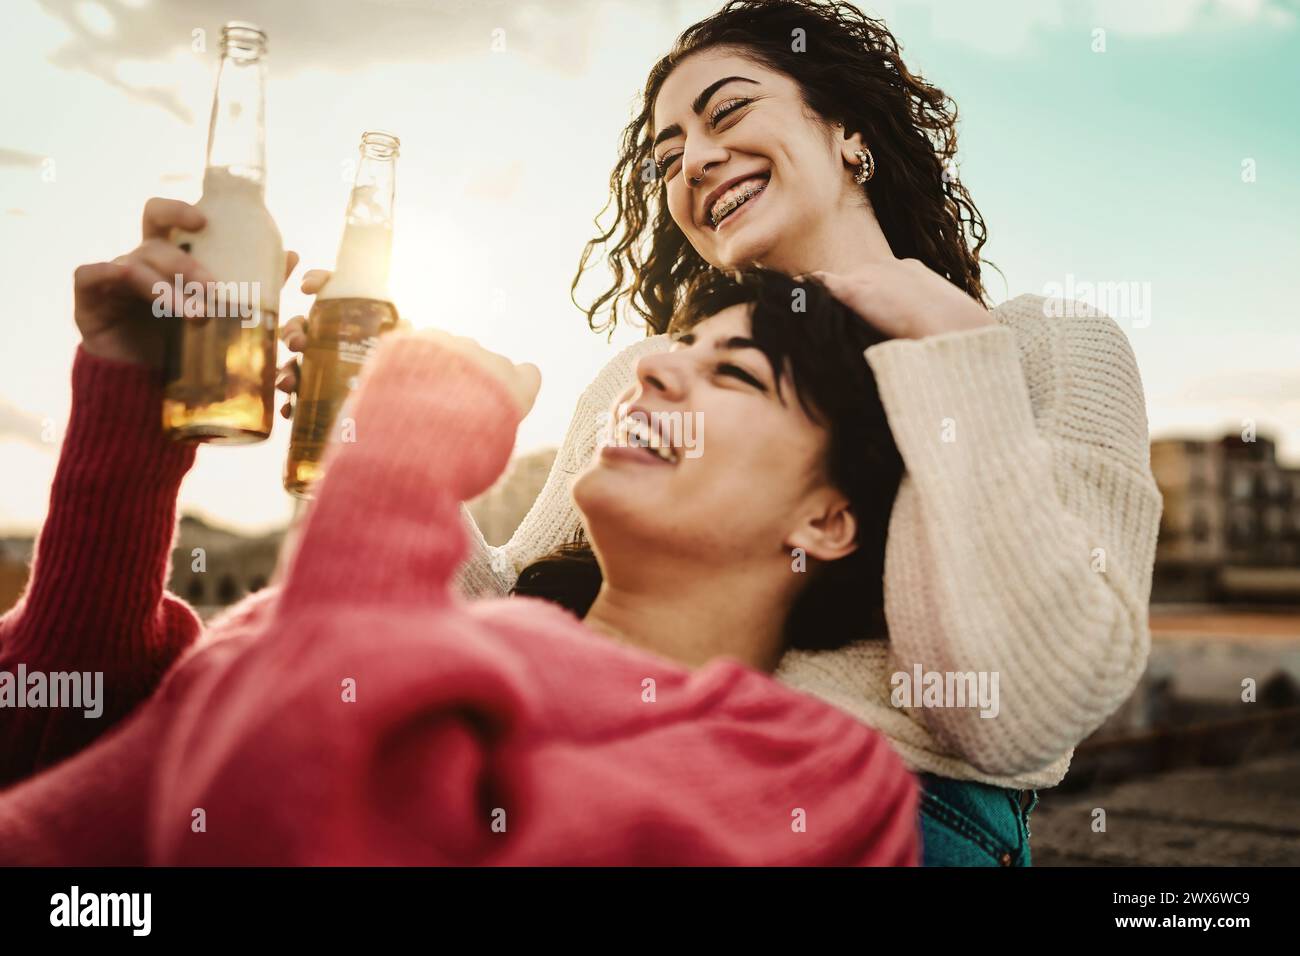 Two women laughing with beers - sunset celebration, golden hour warmth - carefree outdoor fun, candid happiness. Stock Photo